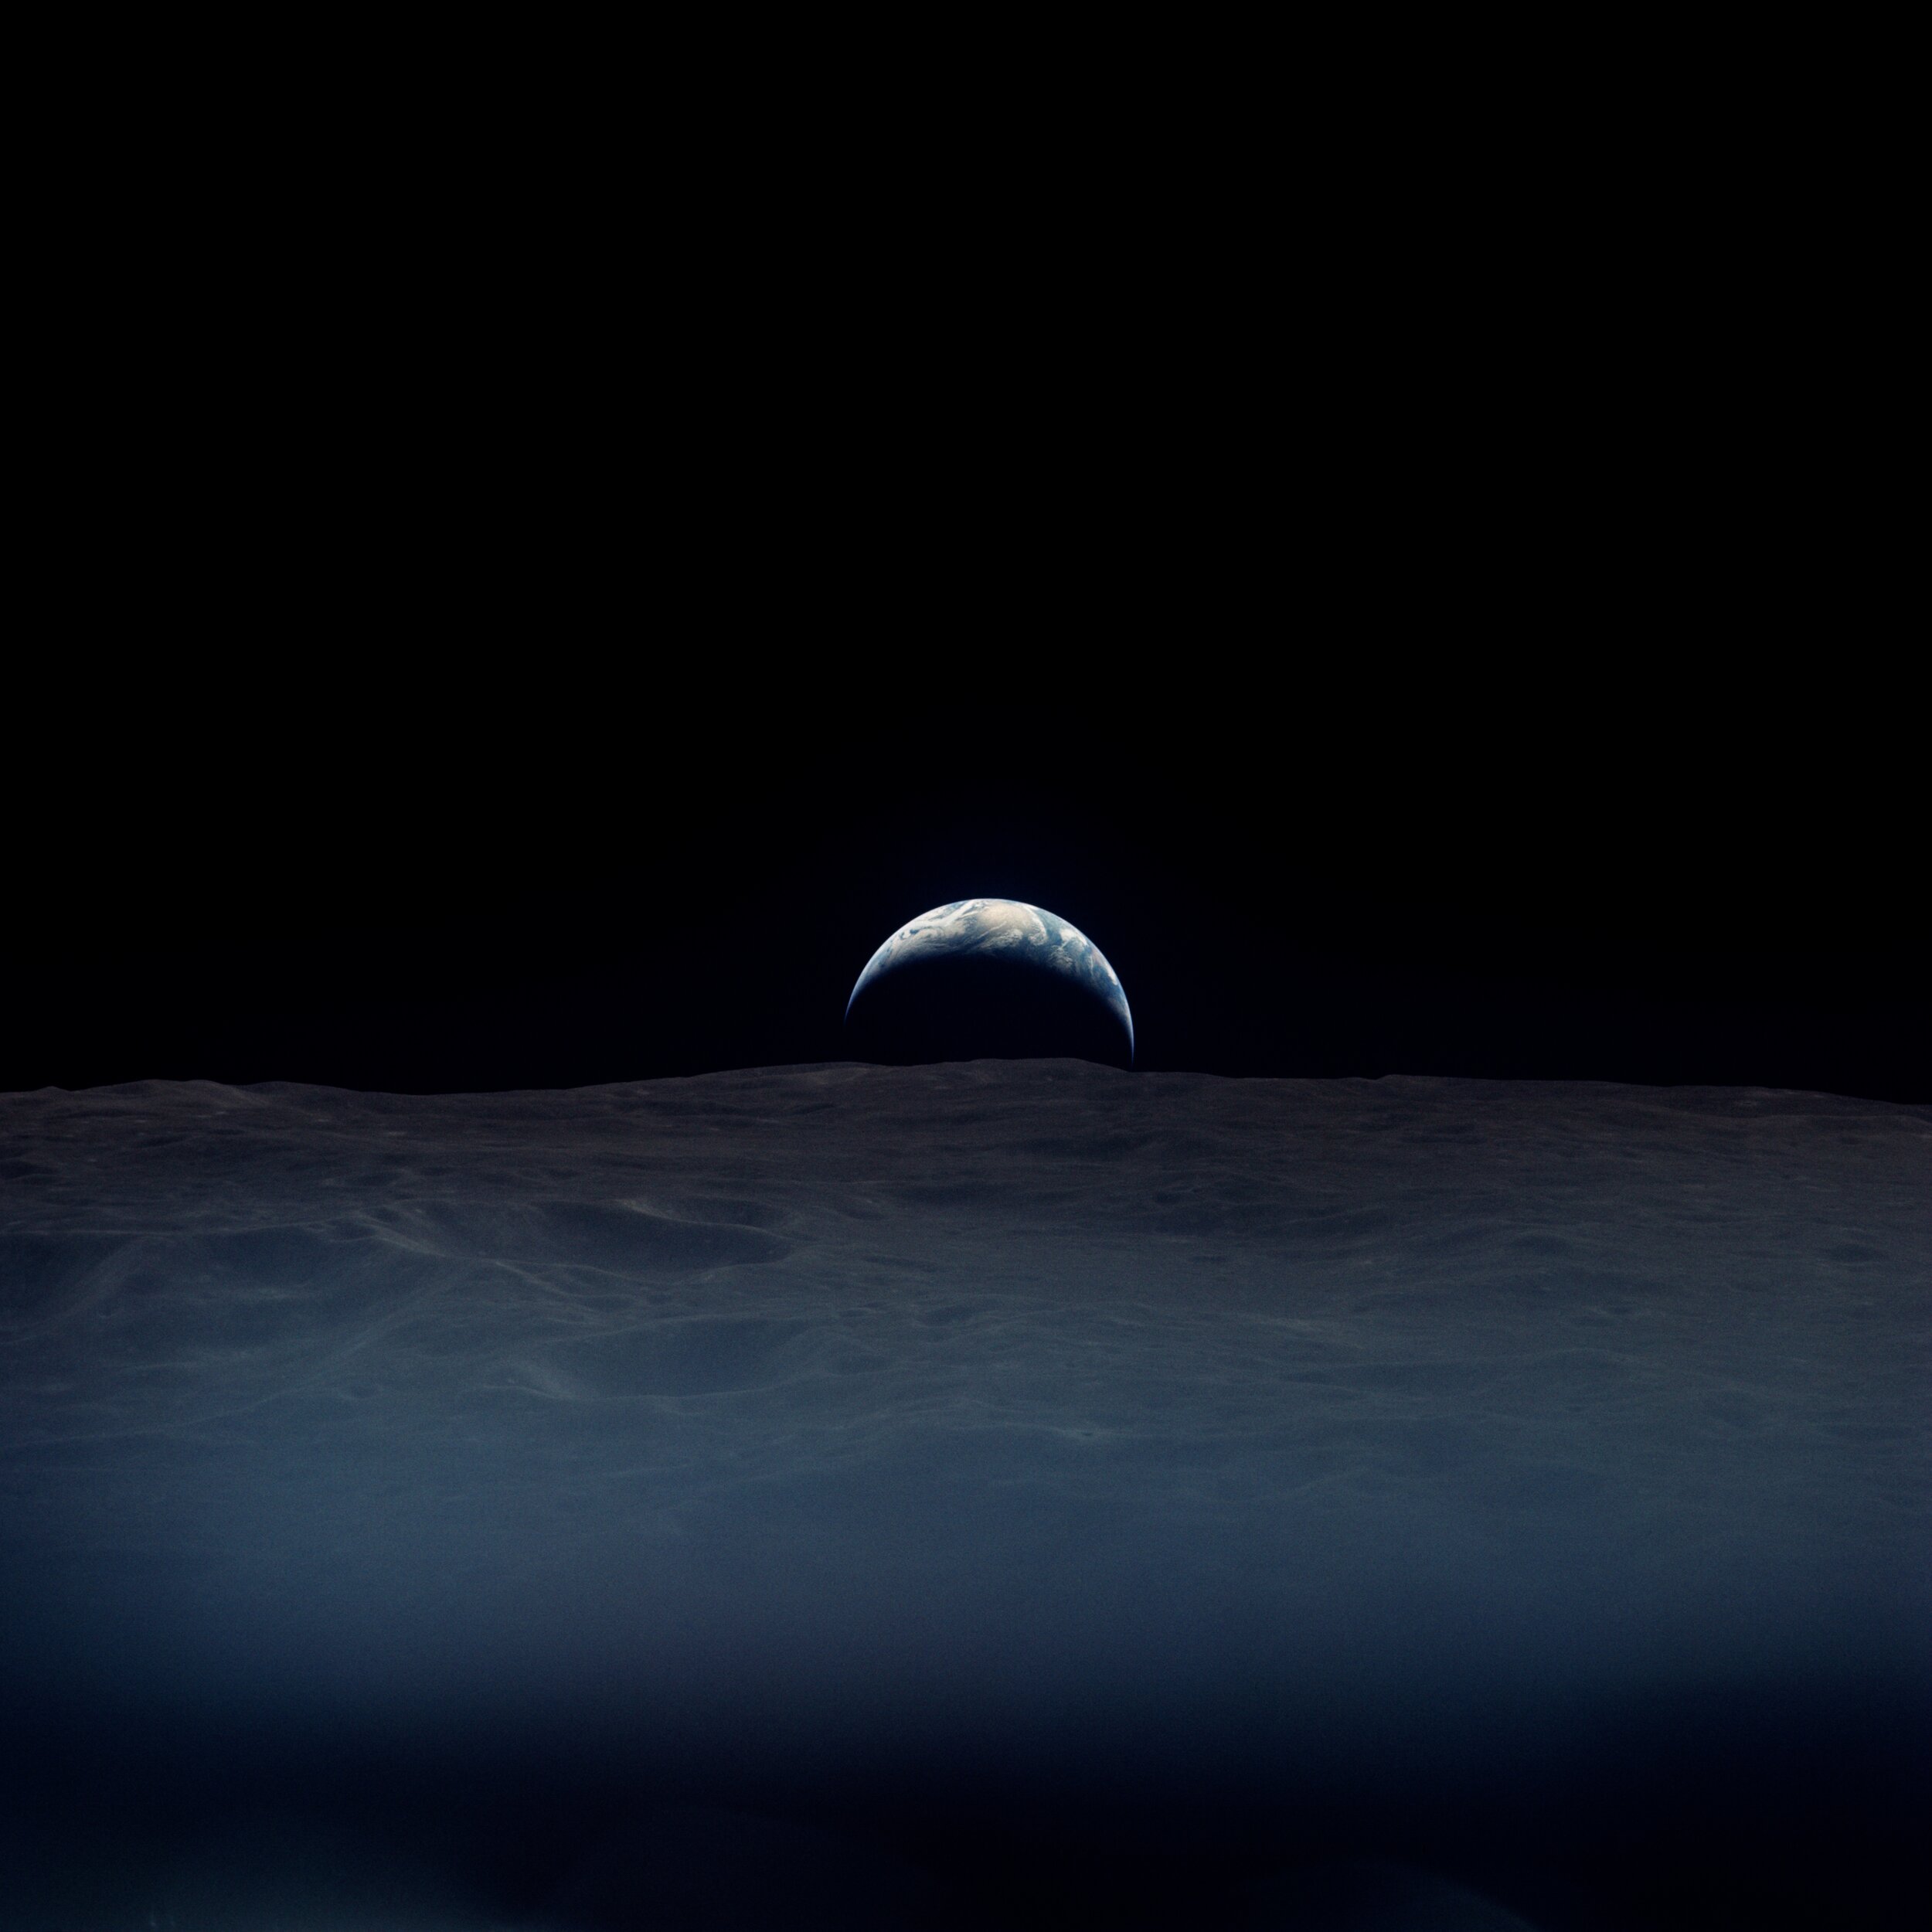  Apollo 12  A haunting crescent earthrise.  It was taken by Richard Gordon, alone aboard the Command Module while the others were down on the lunar surface. Under the clouds lies the Indian Ocean.   Full Resolution   Date – ~12:00 UTC 19 Nov 1969 Len